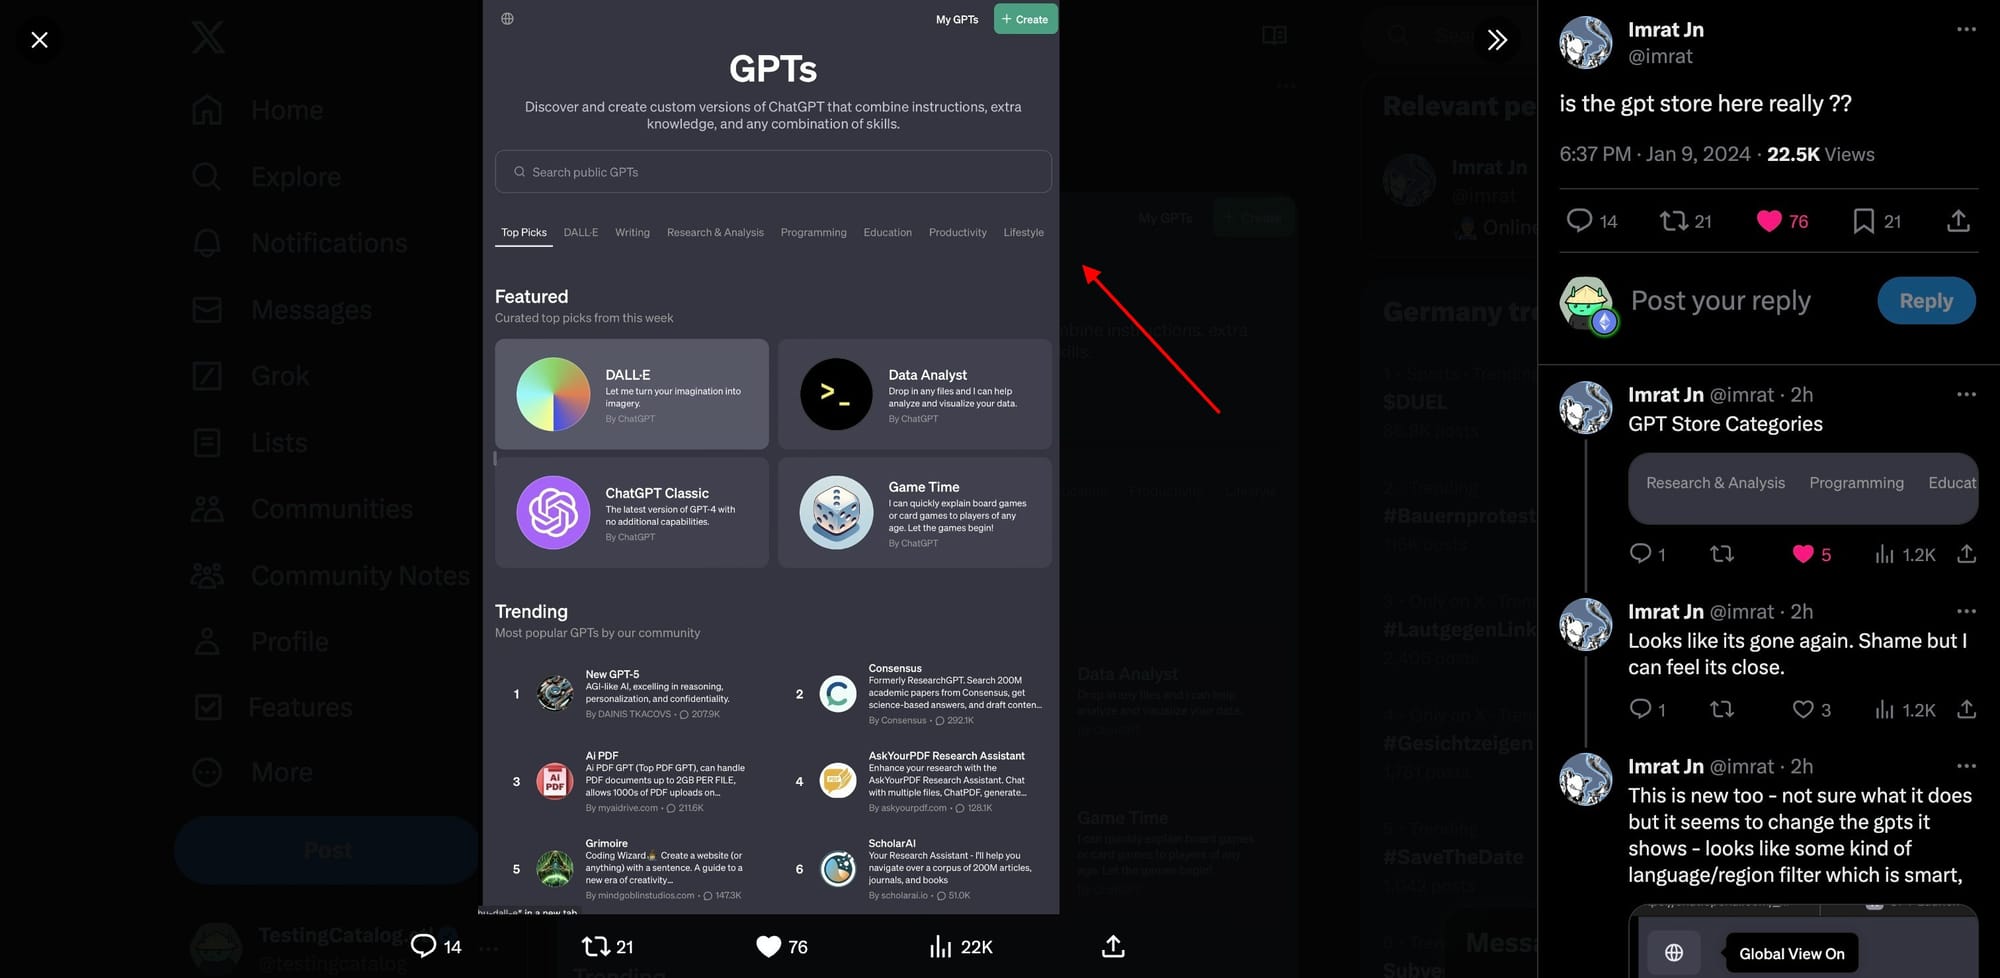 GPT Store leak unveils new UI and features ahead of launch